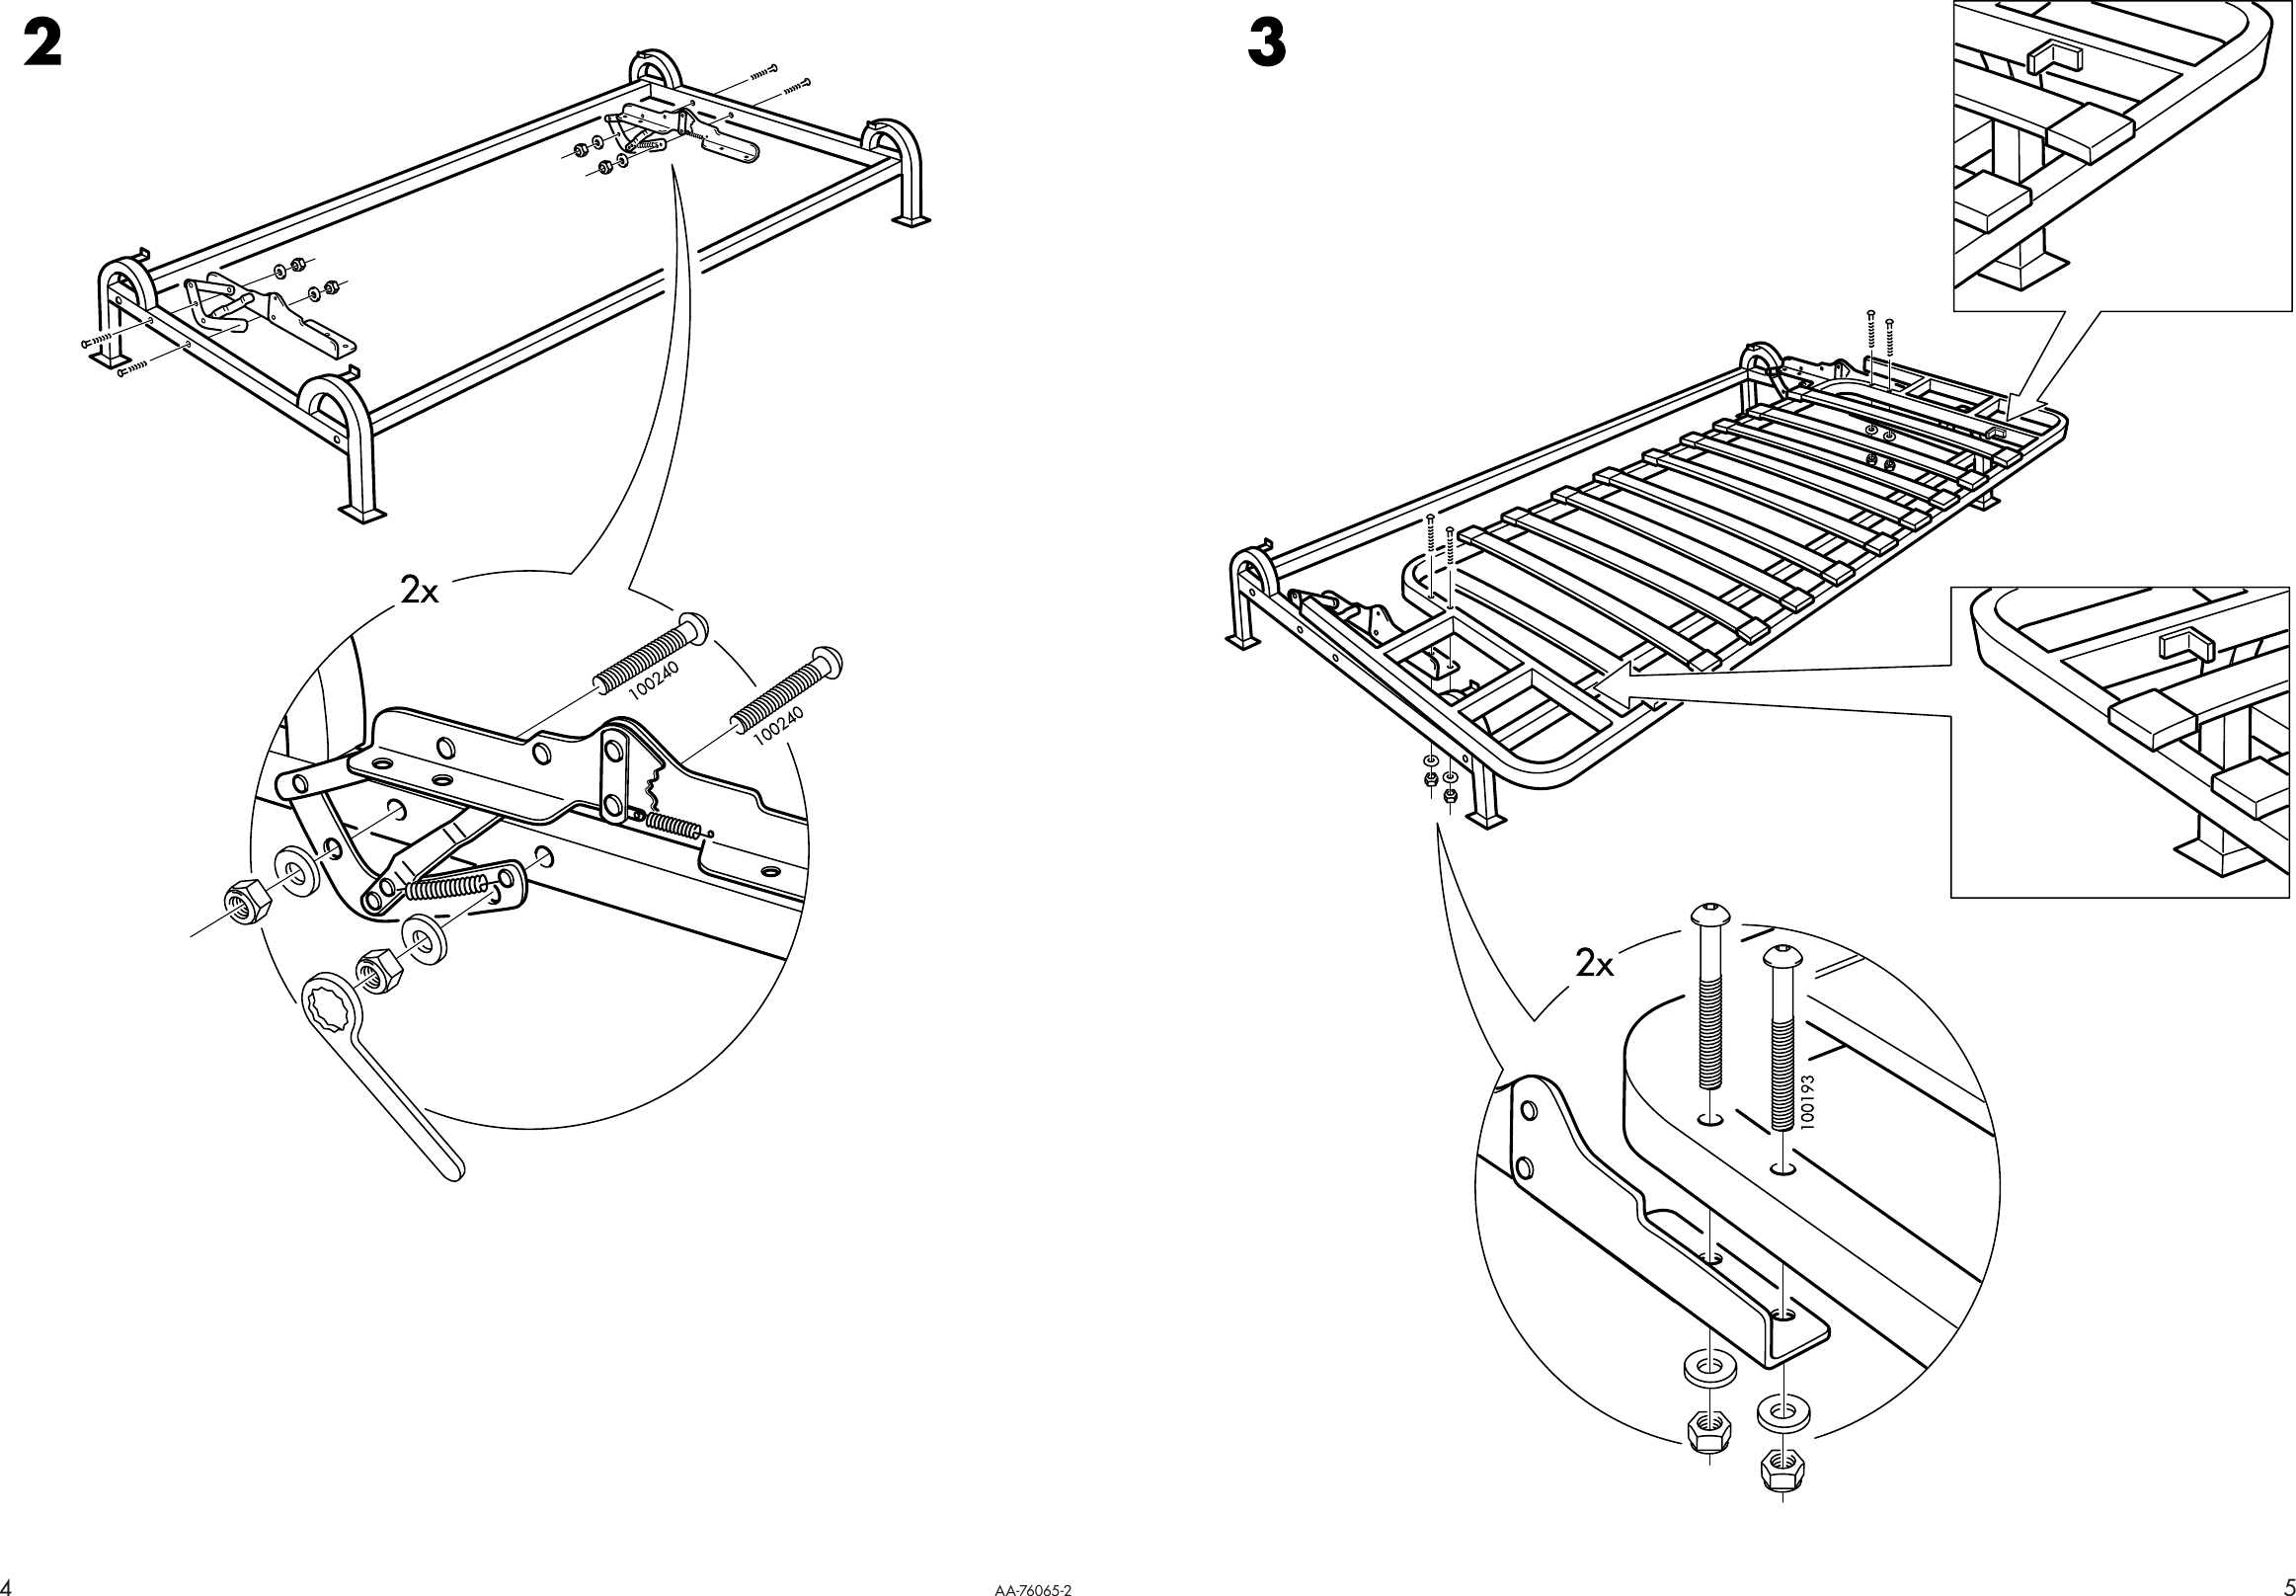 Page 4 of 4 - Ikea Ikea-Exarby-Sofa-Bed-Frame-Assembly-Instruction-3  Ikea-exarby-sofa-bed-frame-assembly-instruction